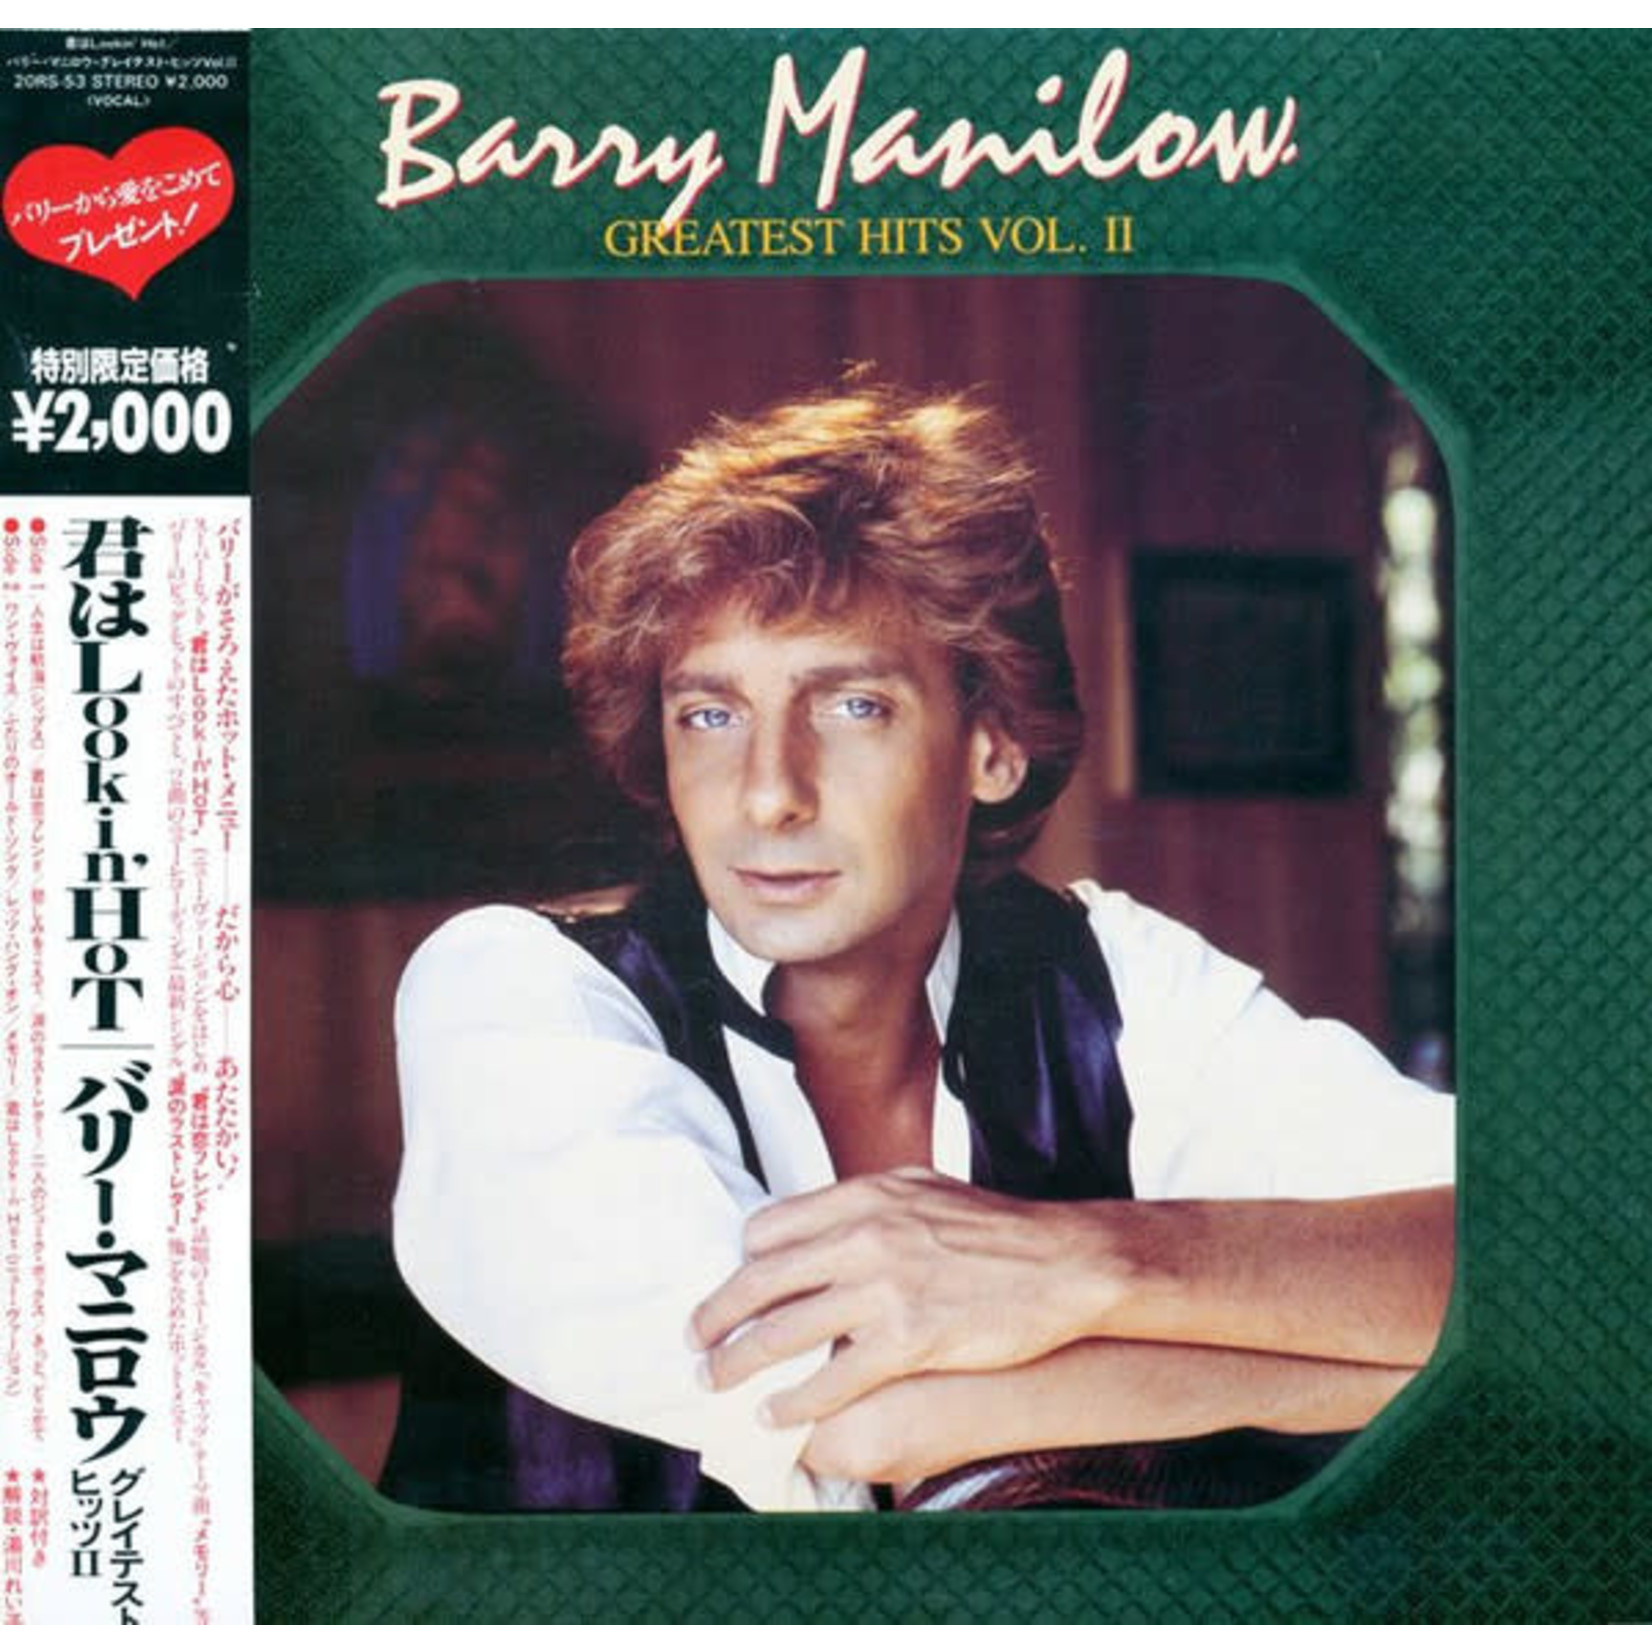 Manilow, Barry: Greatest Hits Vol. 2 [JAPANESE VINTAGE]